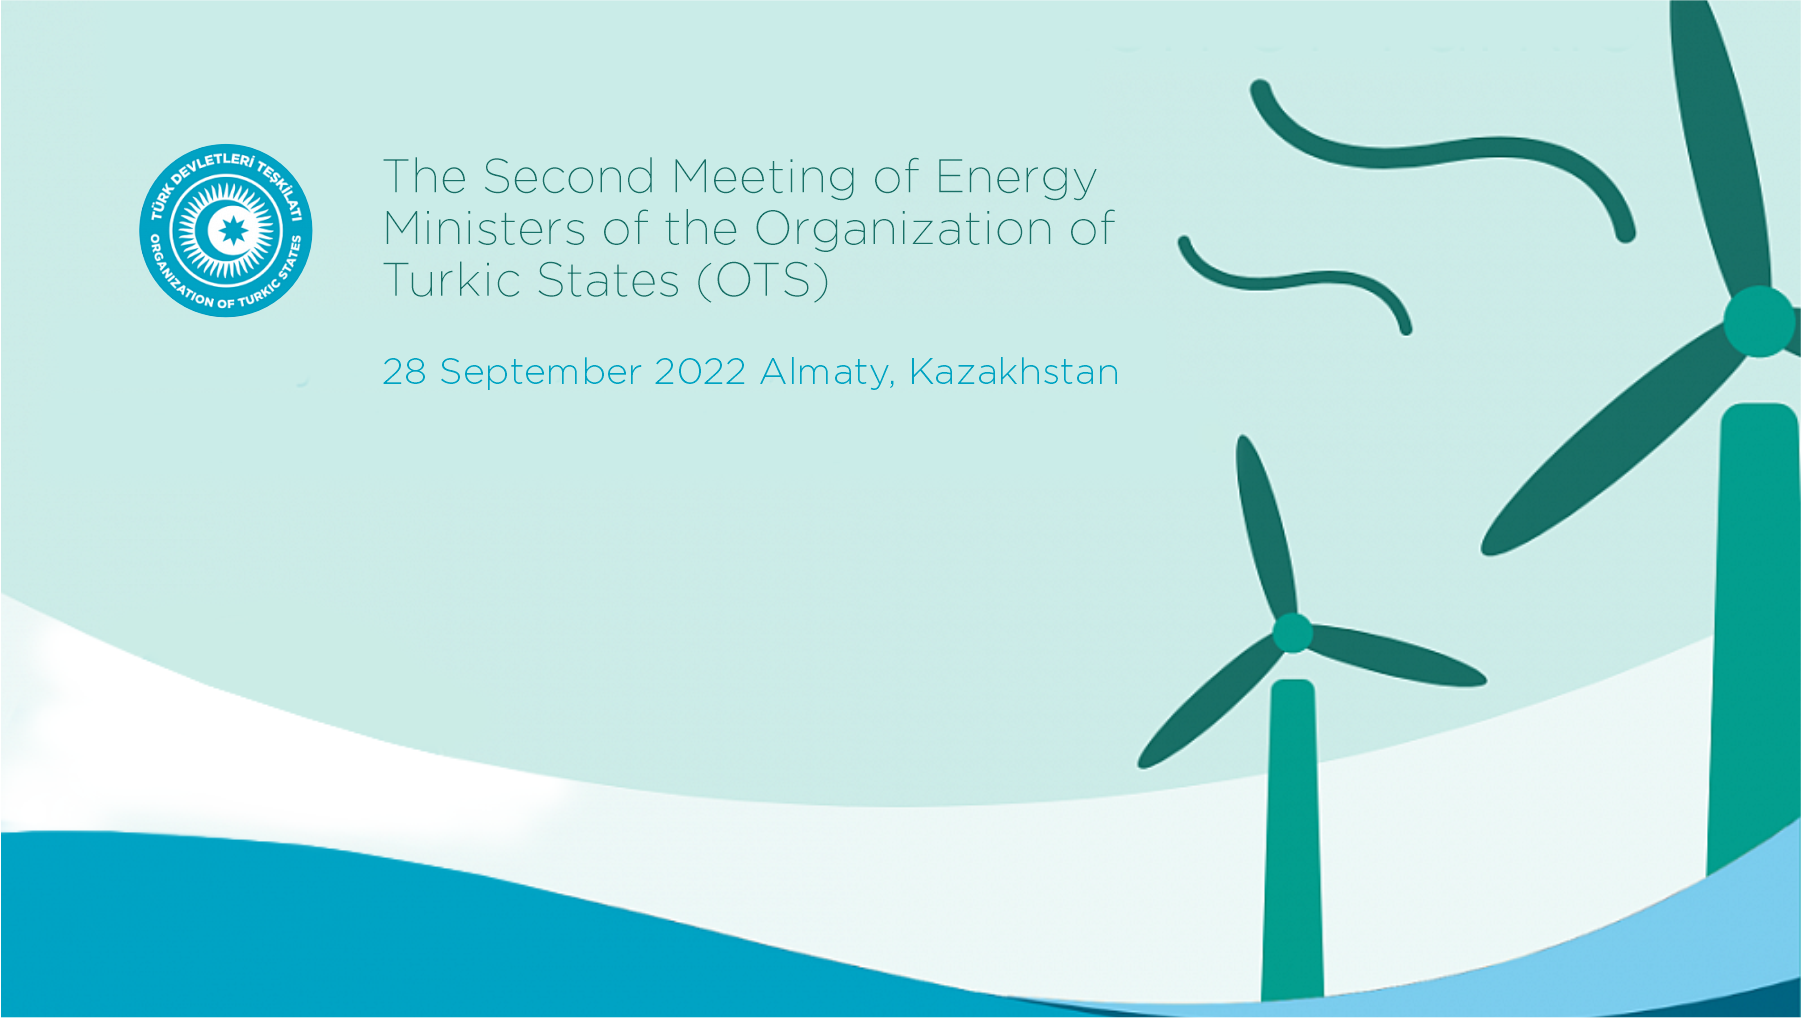 Azerbaijani energy minister to attend OTS's energy ministers meeting in Almaty